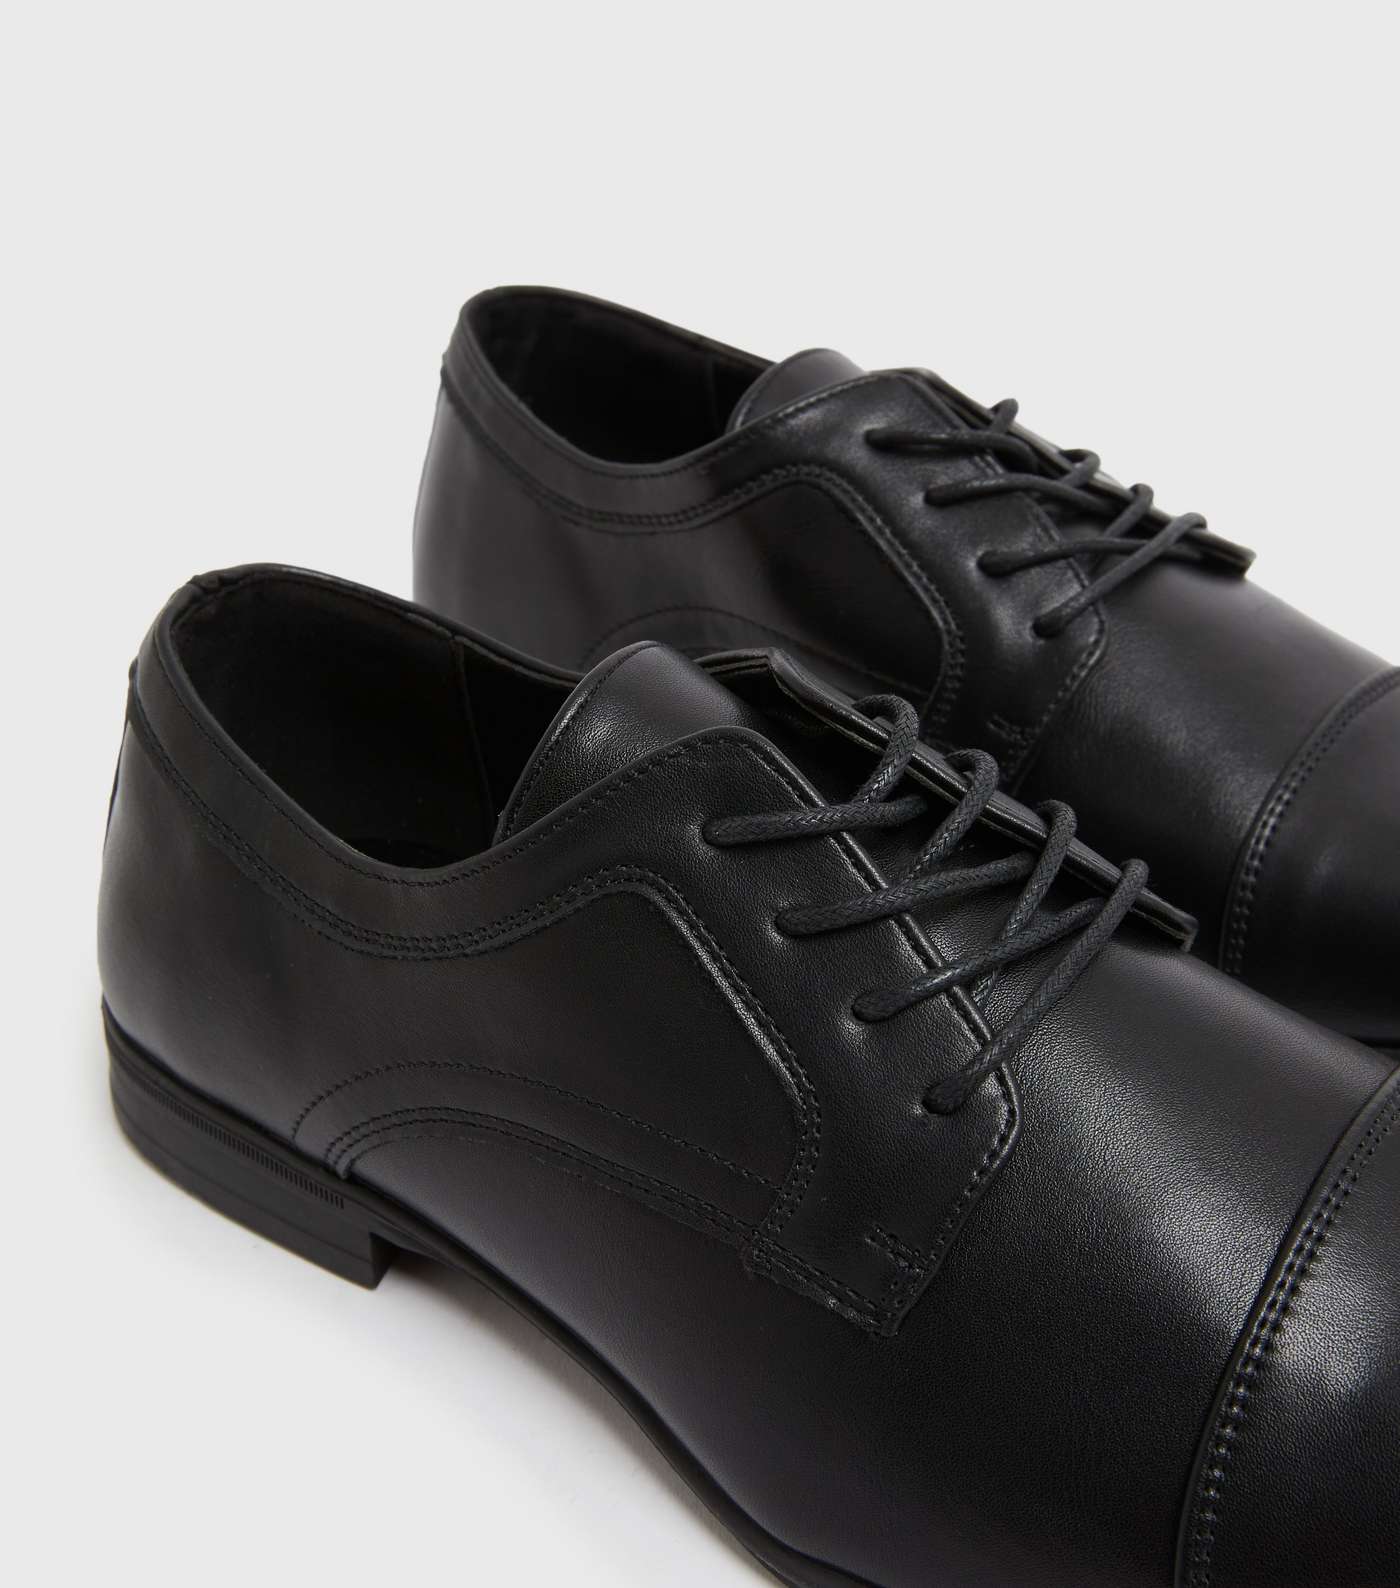 Black Leather-Look Oxford Shoes Image 4